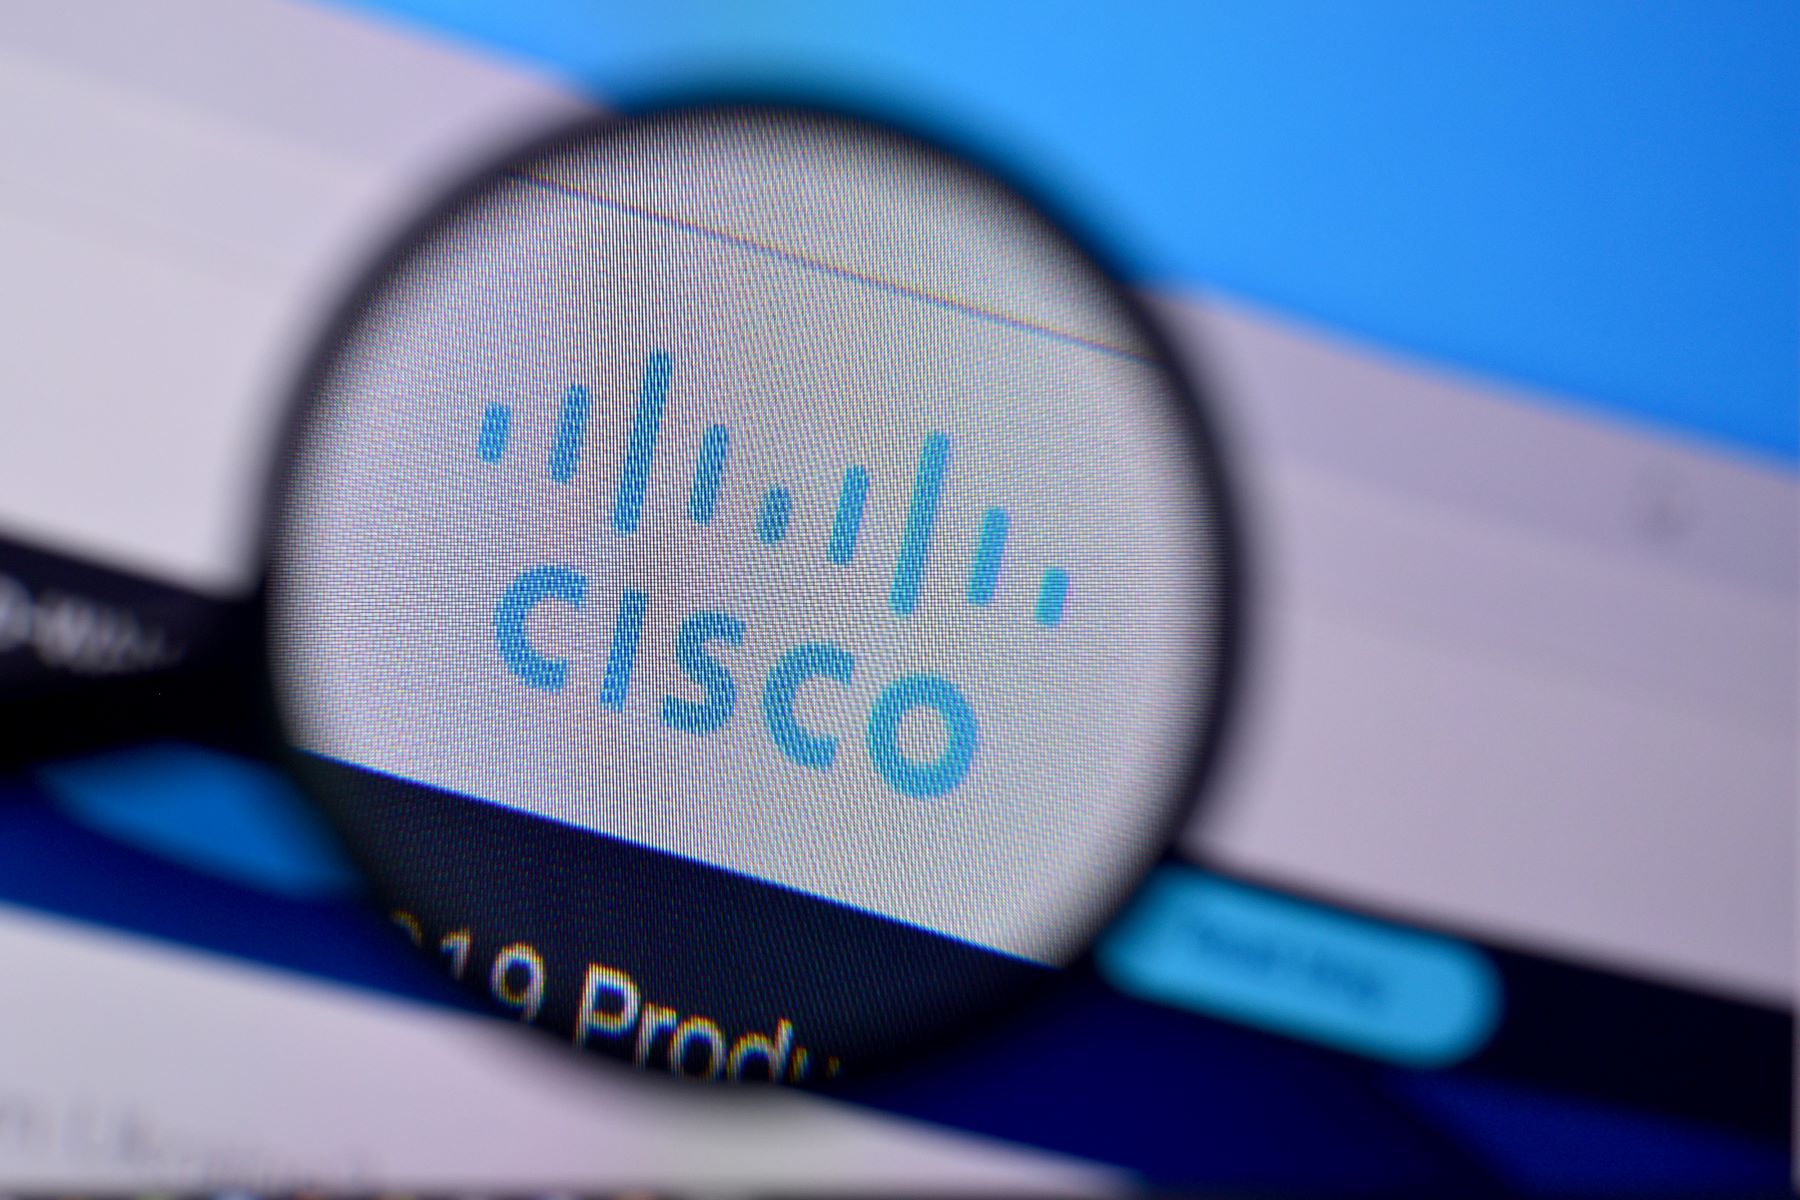 What Is A Function Of Cisco Advanced Malware Protection For A Next-Generation IPS?